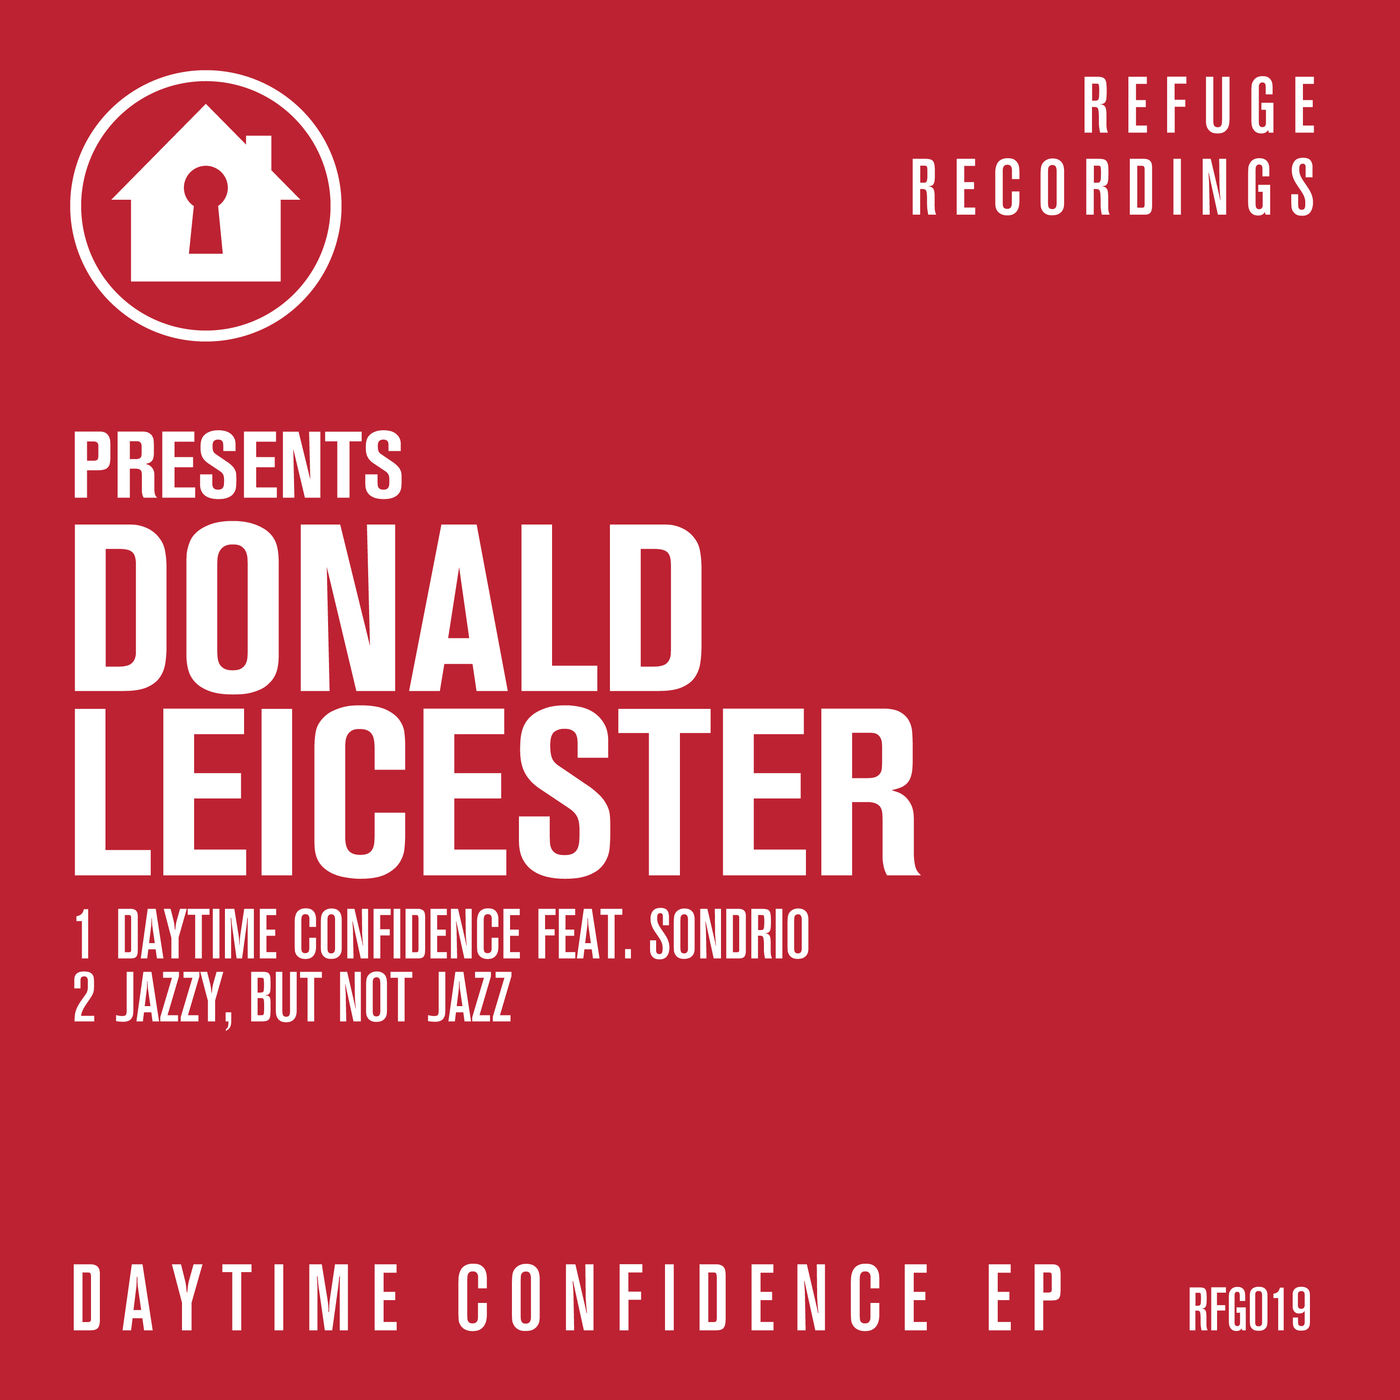 Donald Leicester - Daytime Confidence / Refuge Recordings